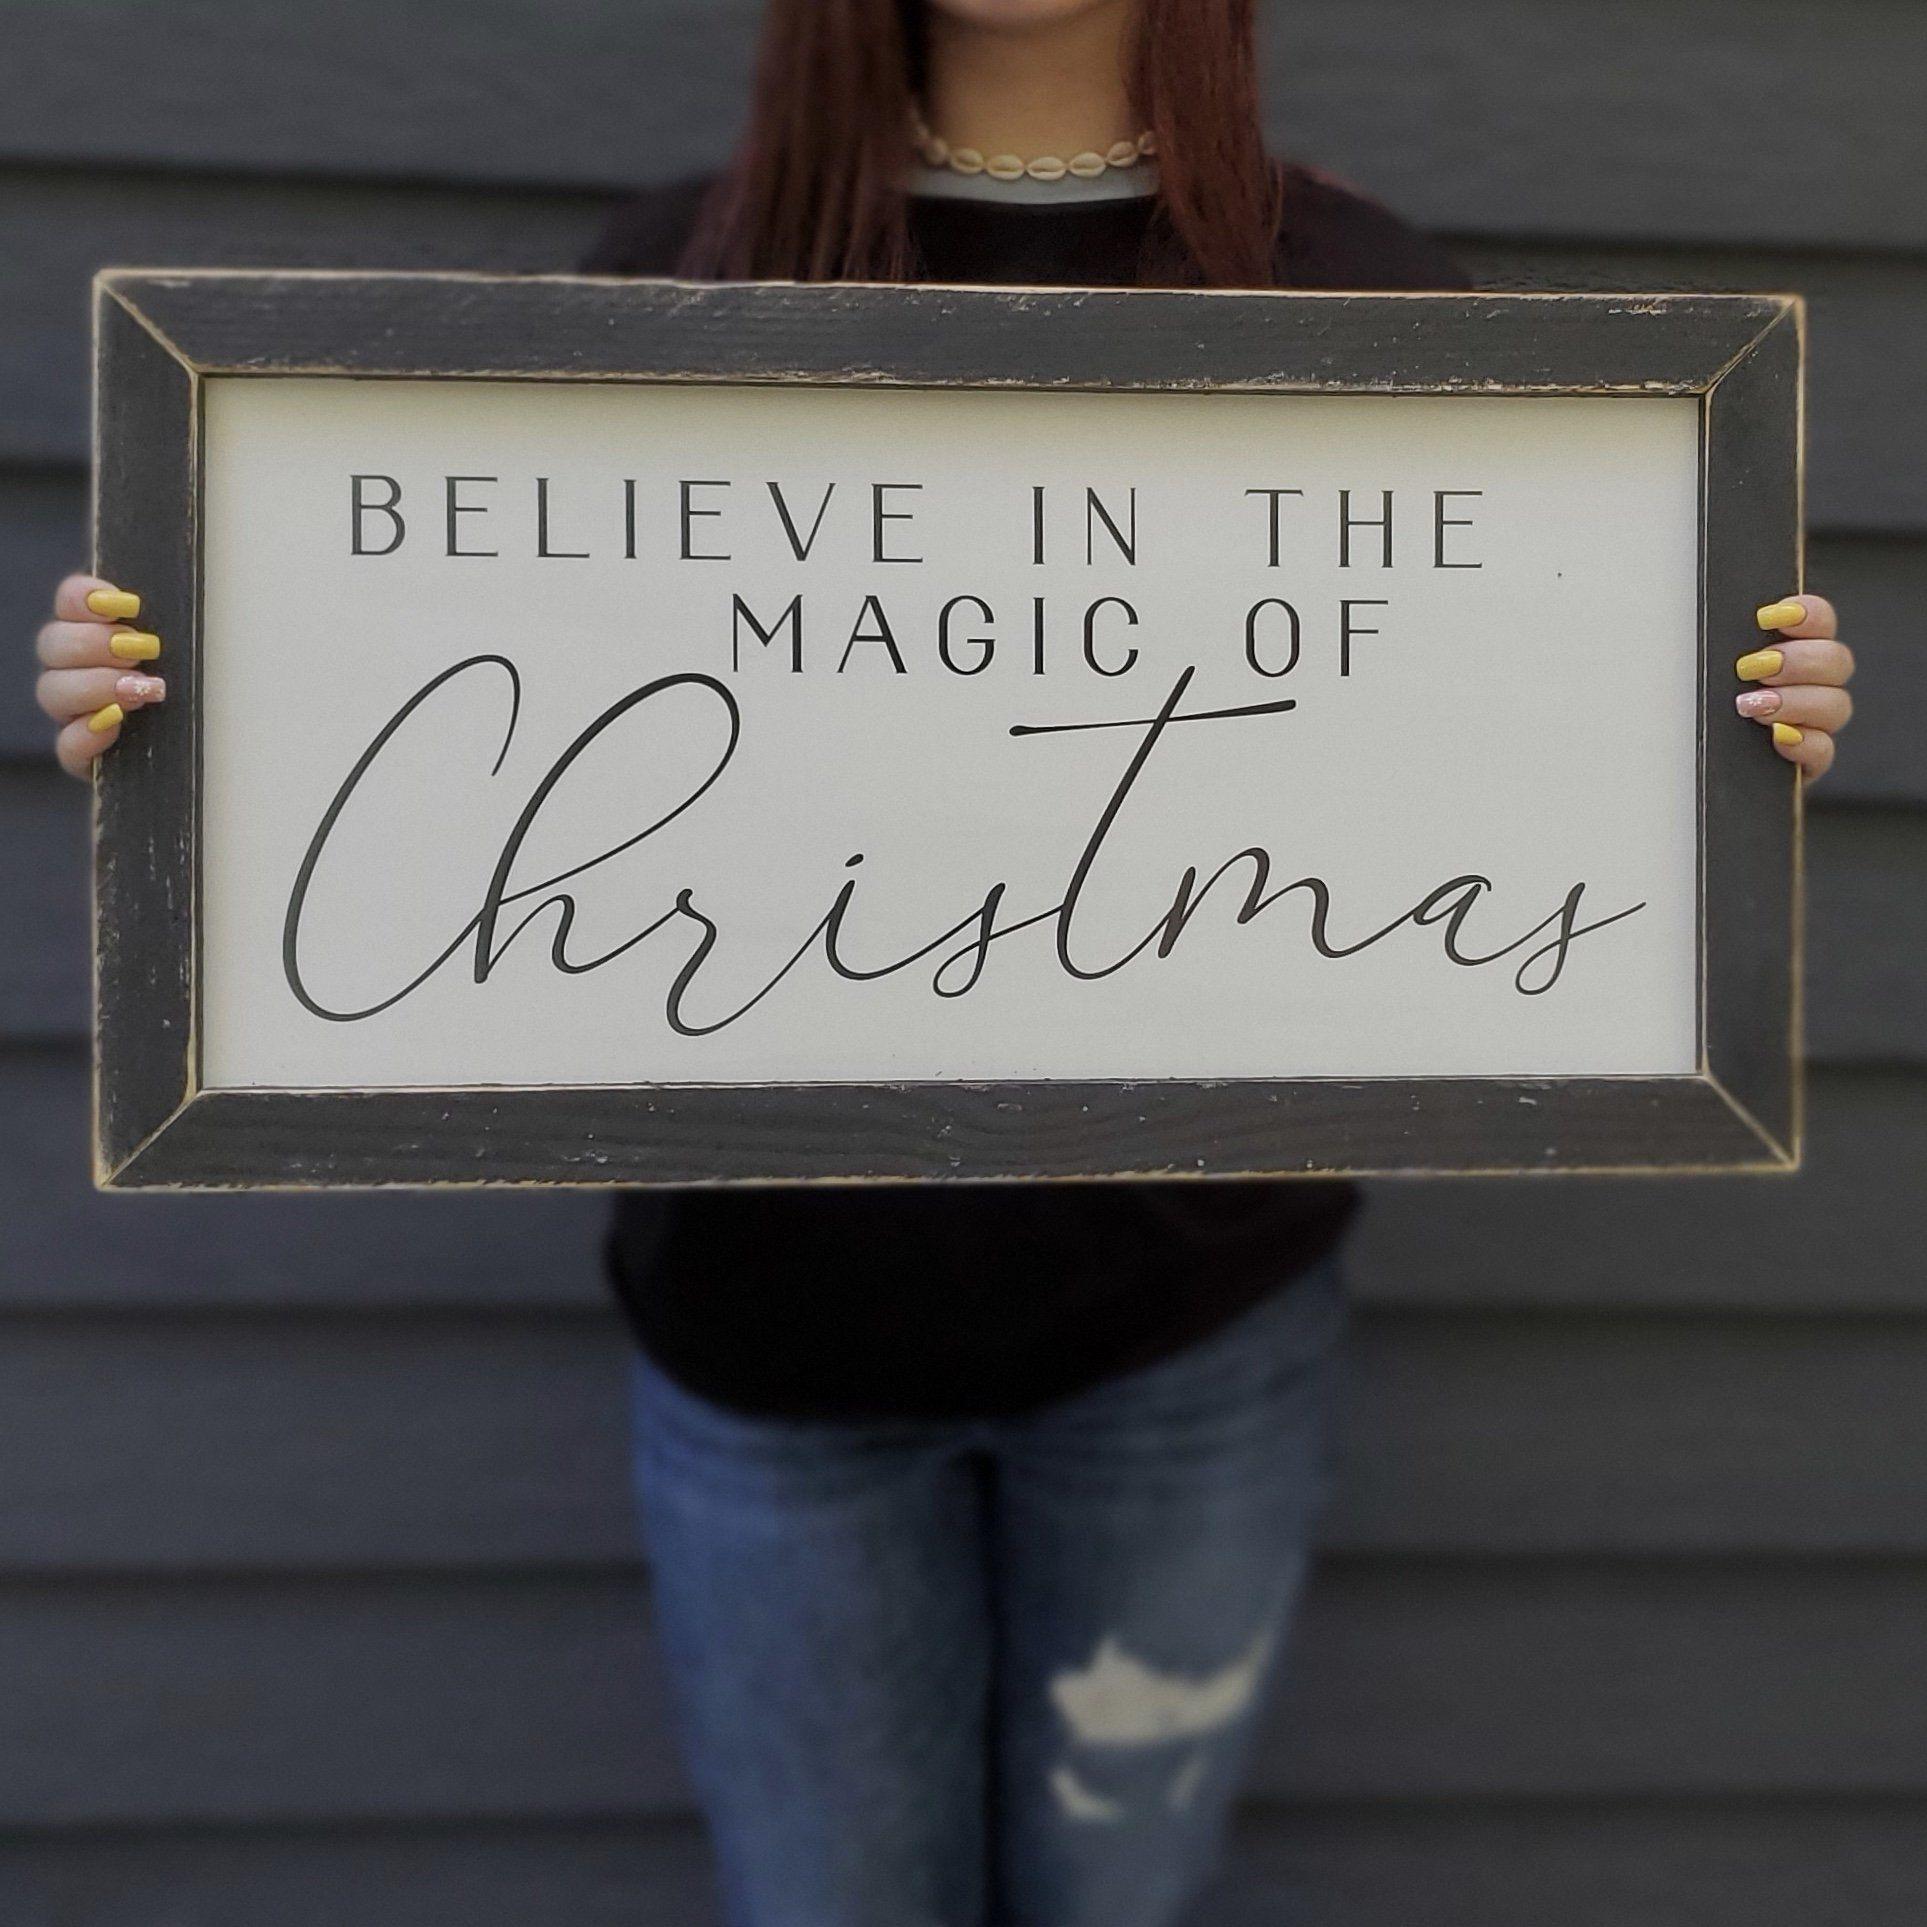 Believe in the Magic of Christmas Rustic Sign - A Rustic Feeling